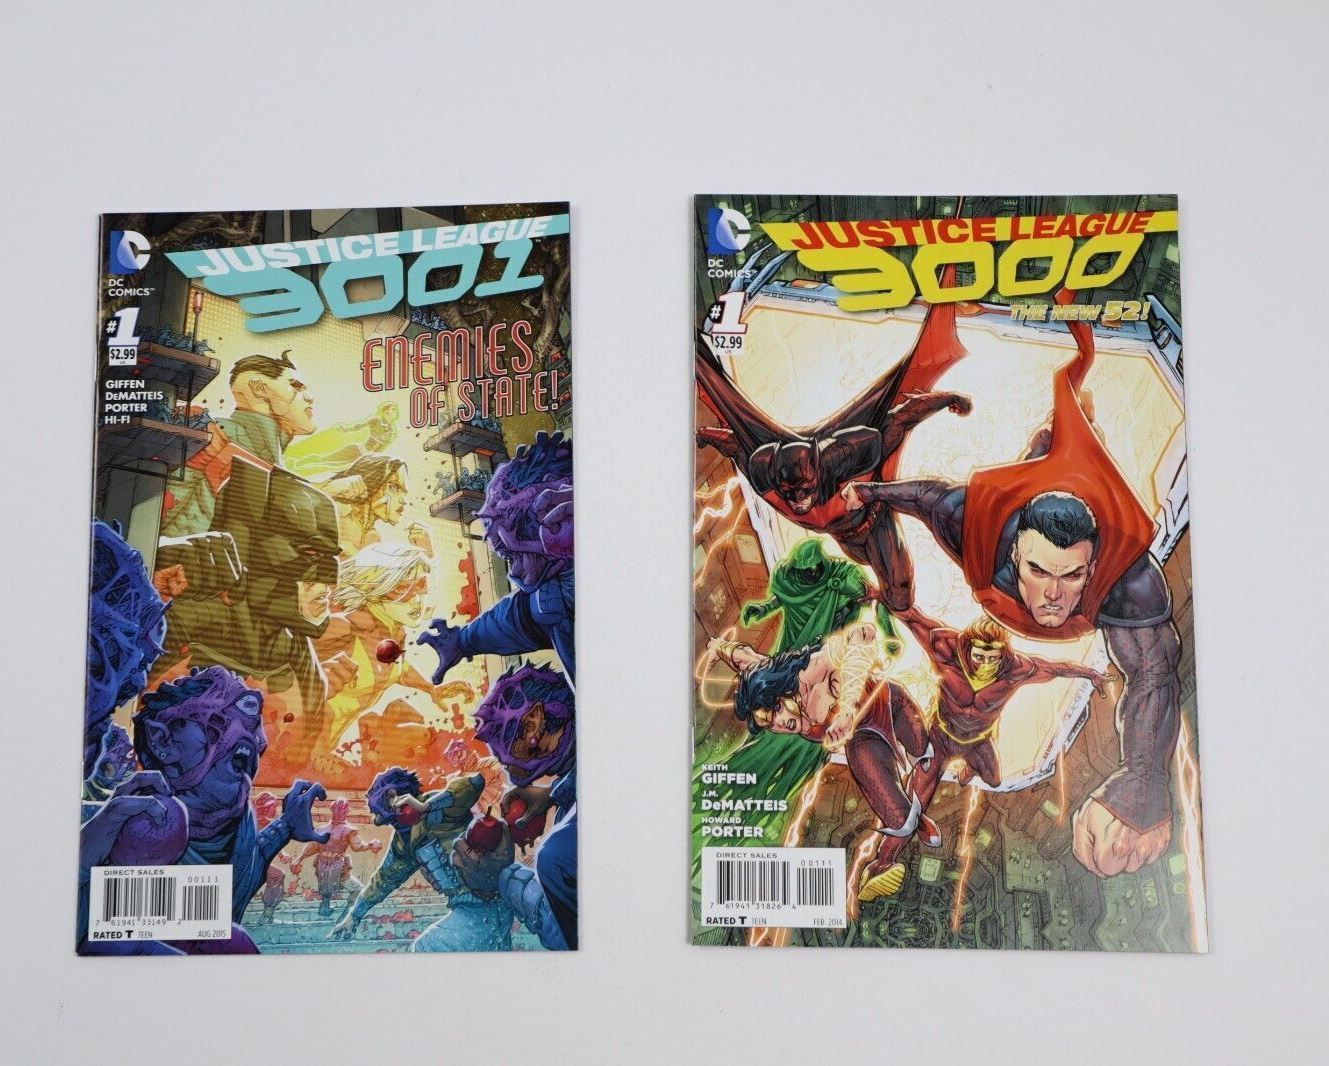 JUSTICE LEAGUE 3000 #1 And 3001 #1 (LOT OF 2) Comic Books